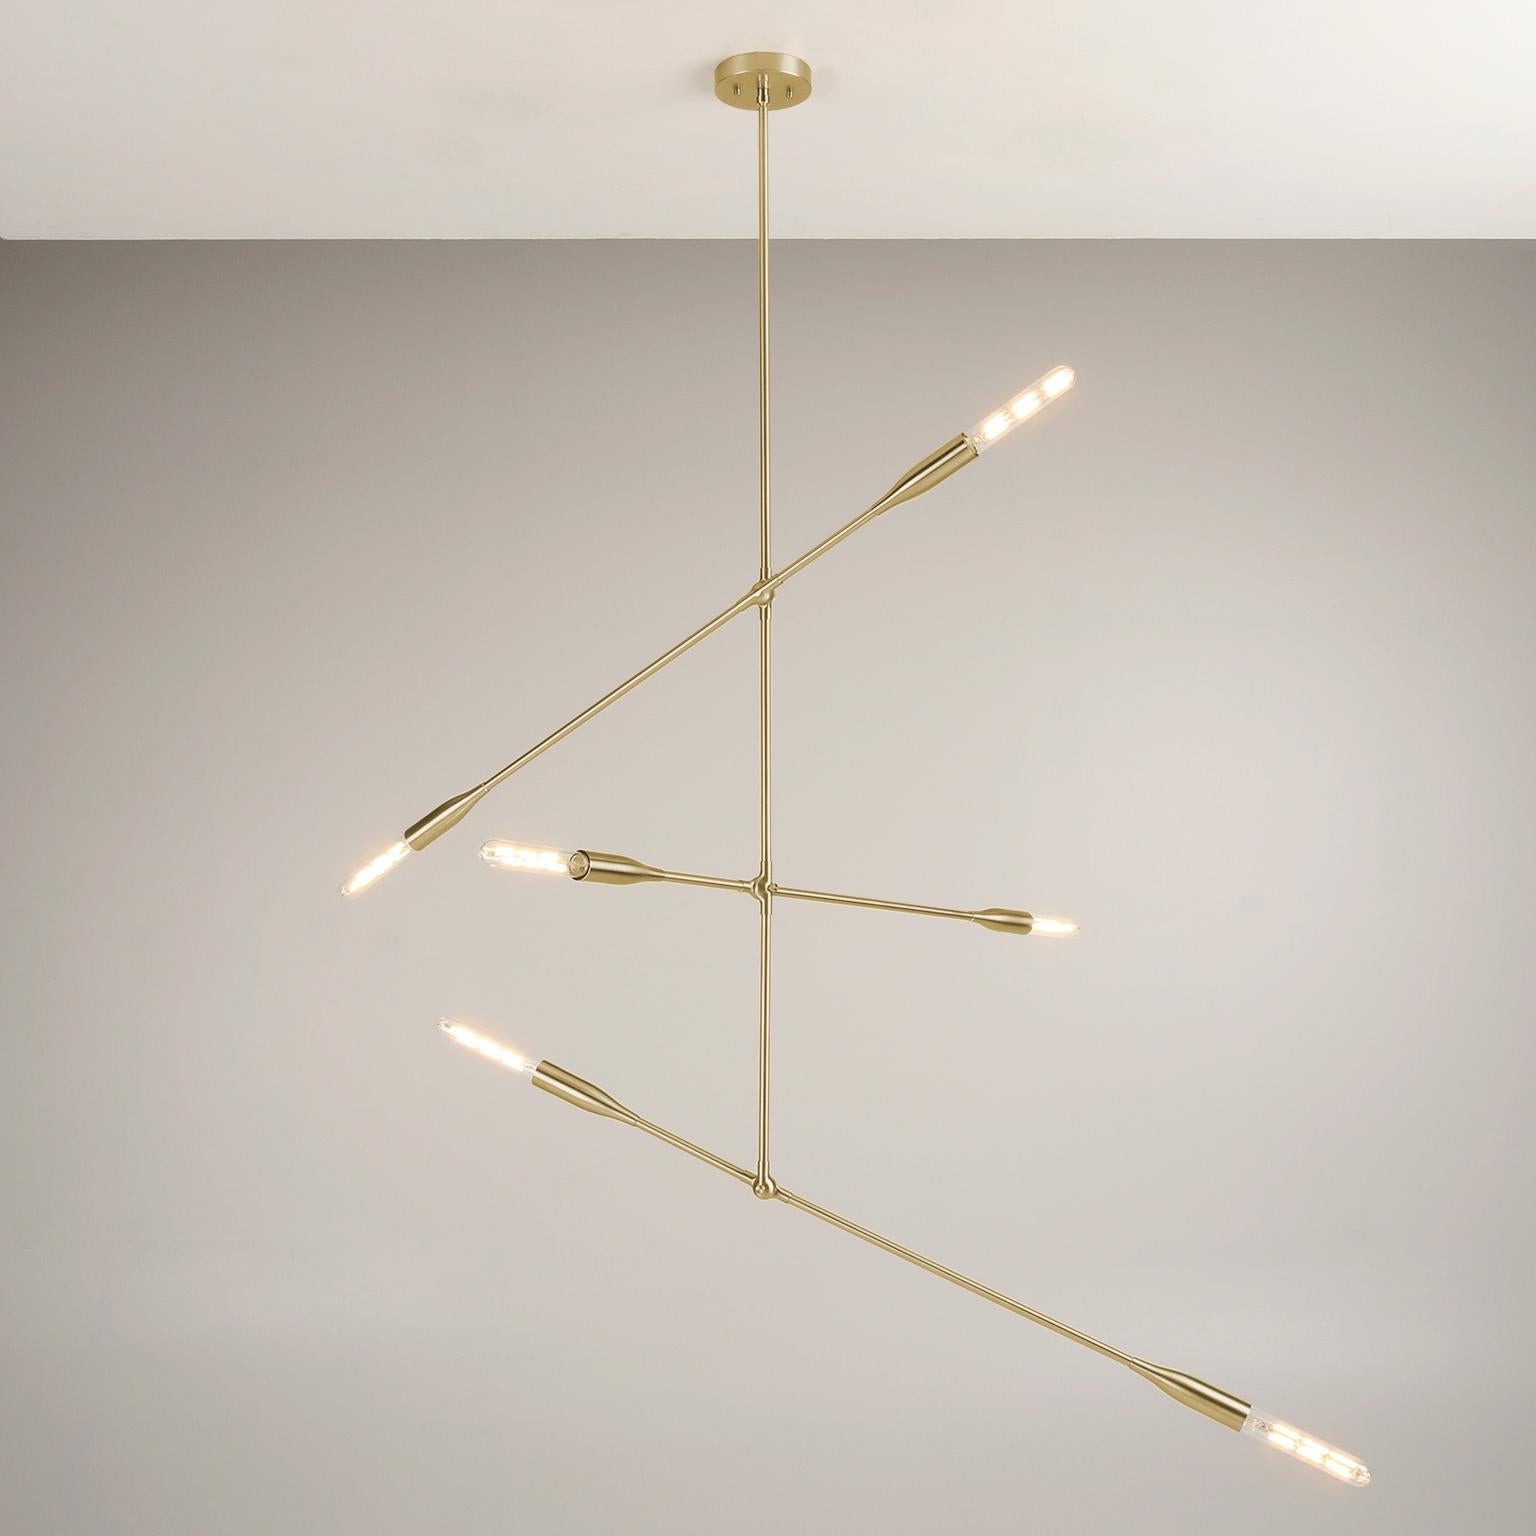 The Sorenthia 3-Arm is a modern, linear pendant with bold, elegant lines and dramatic negative space. The custom-made light fixture incorporates an element of the organic in its design language with long, reaching arms that can be adjusted on site,